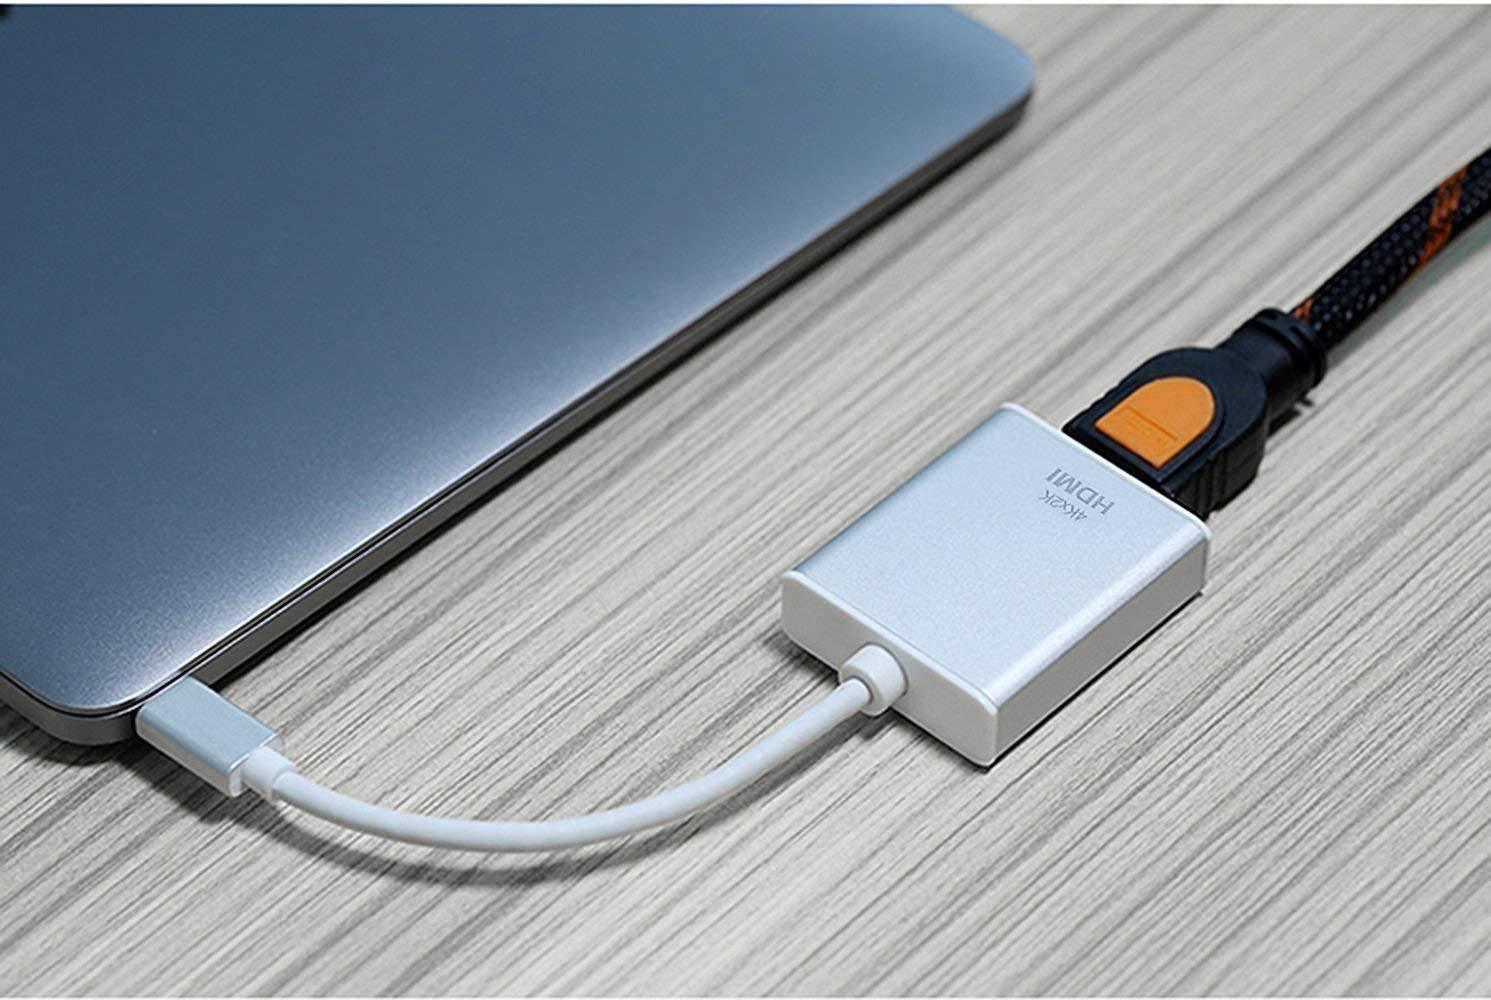 Dealsplant USB 3.1 Type-C (USB-C) to HDMI Adapter for Macbook iPad and latest Laptops-Laptops & Computer Peripherals-dealsplant